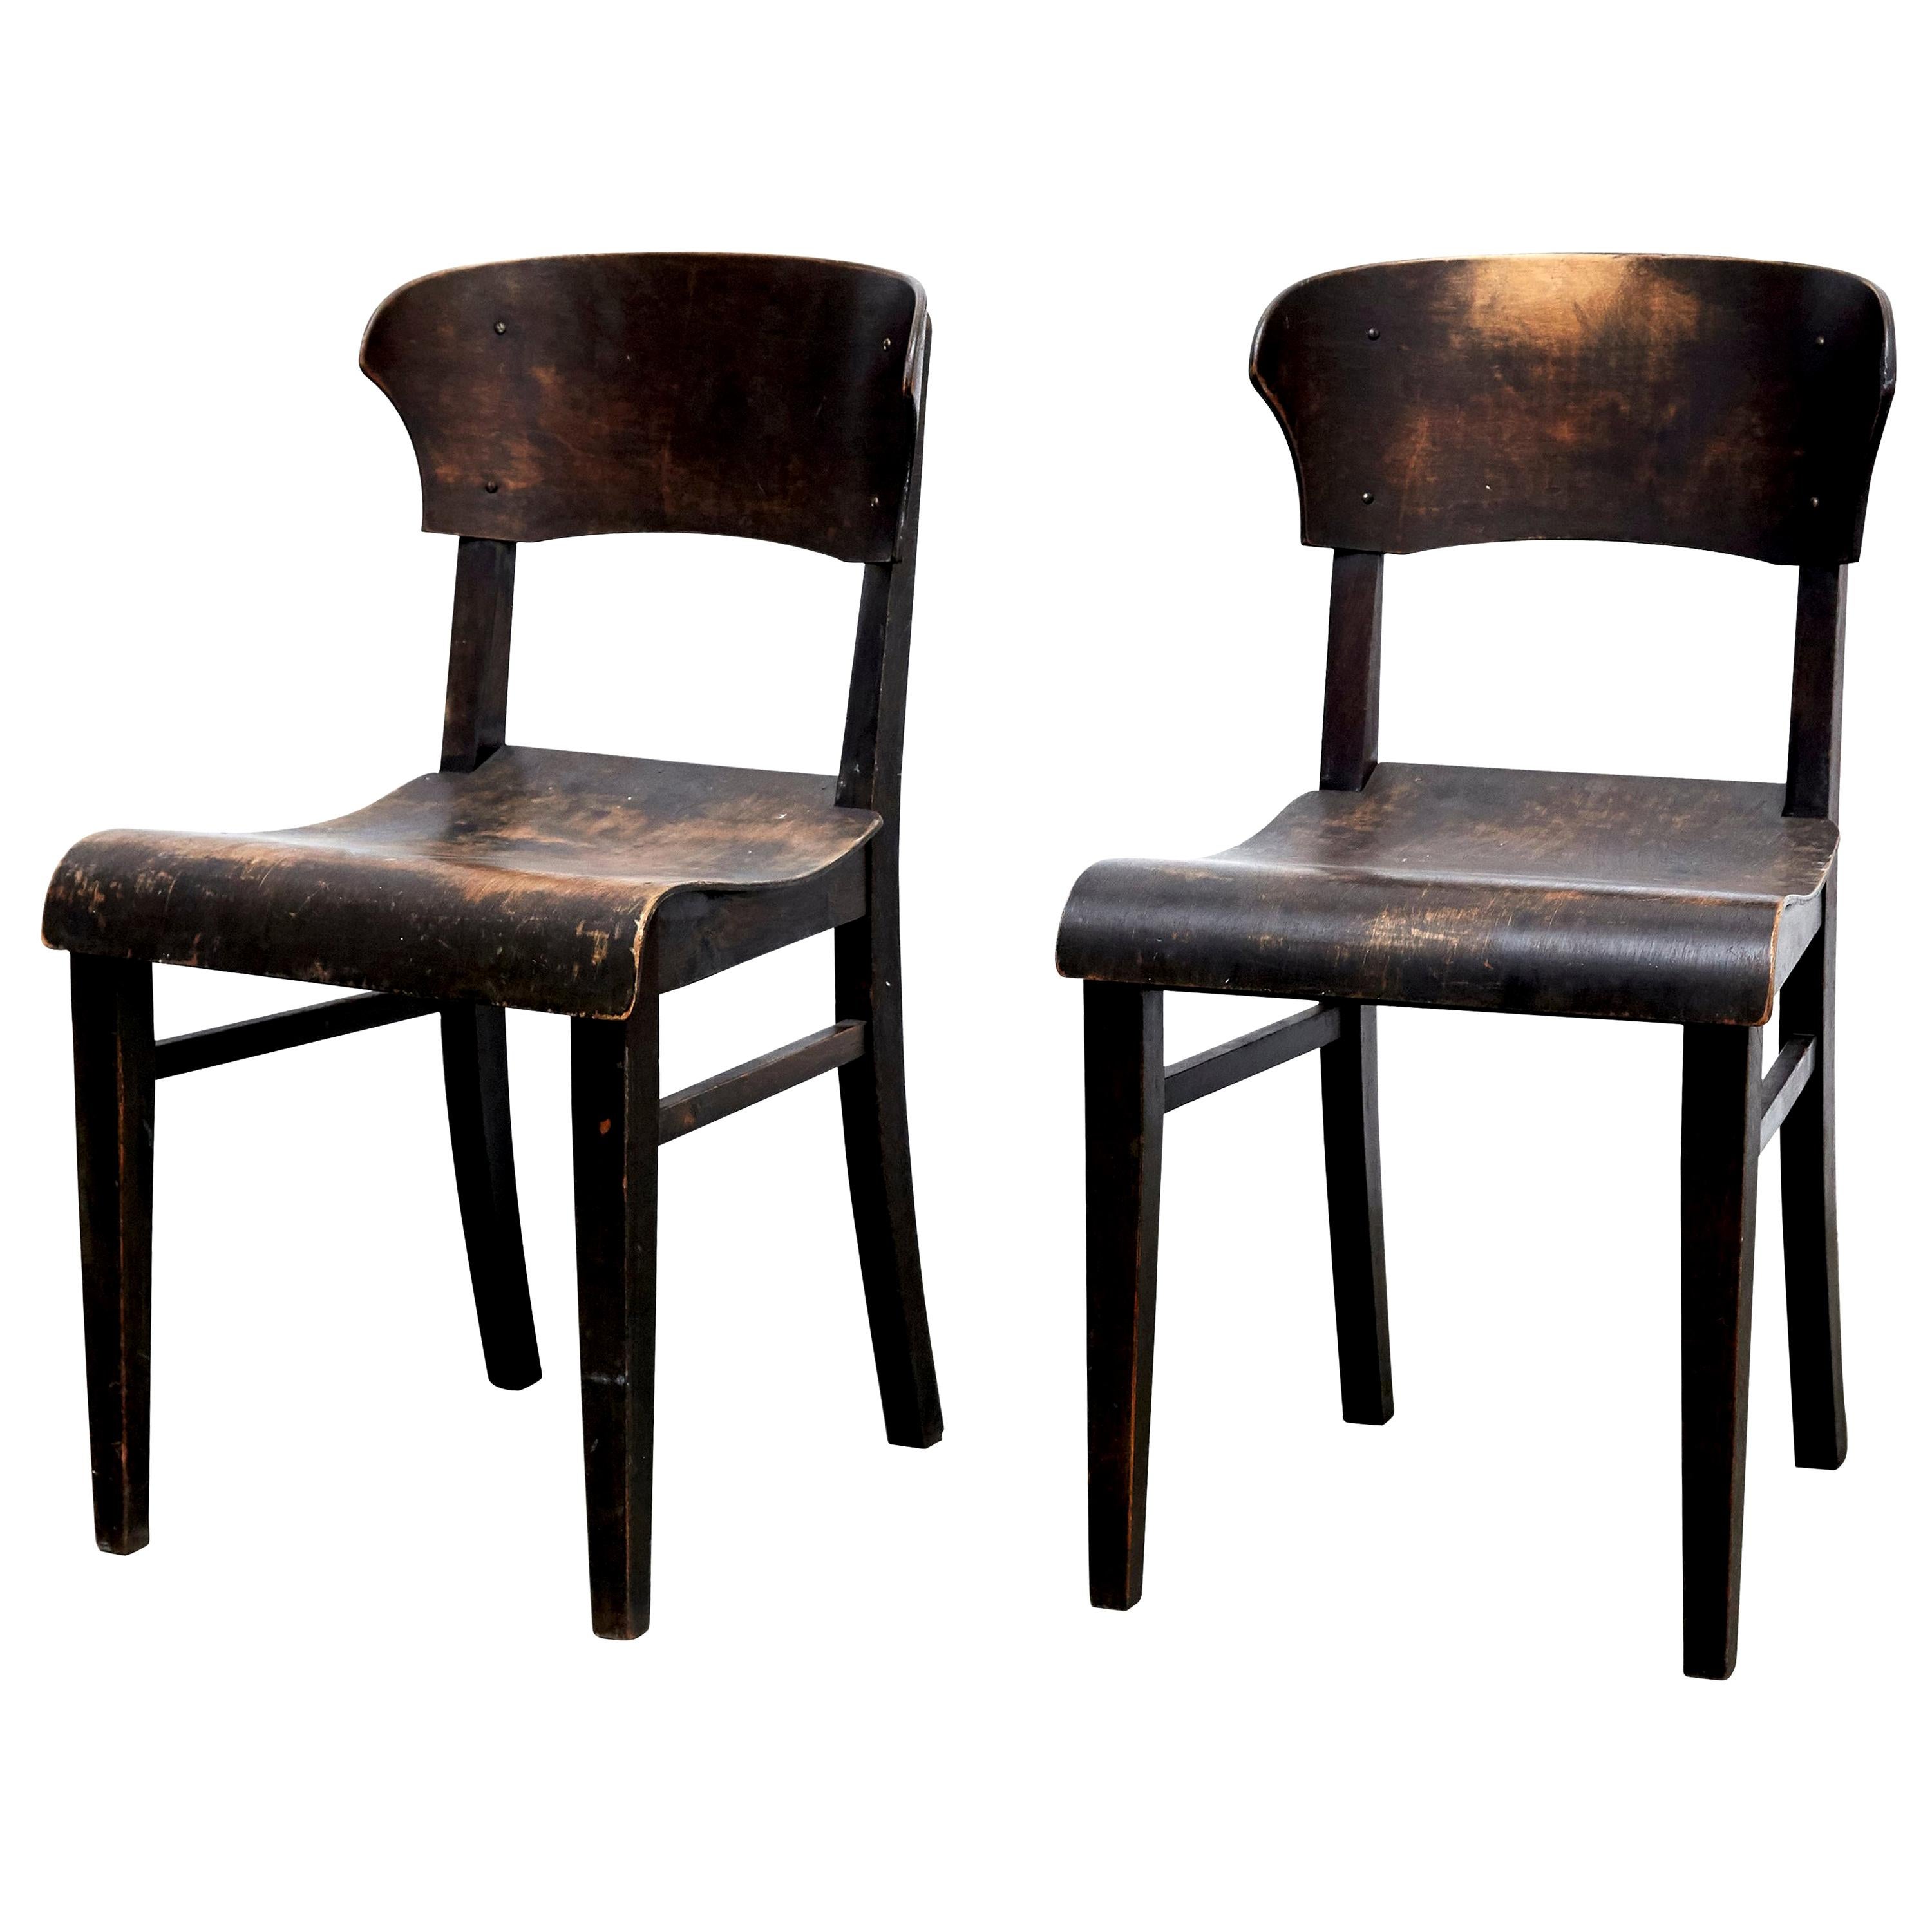 Pair of Wooden Chairs in Style of Rockhausen, circa 1925